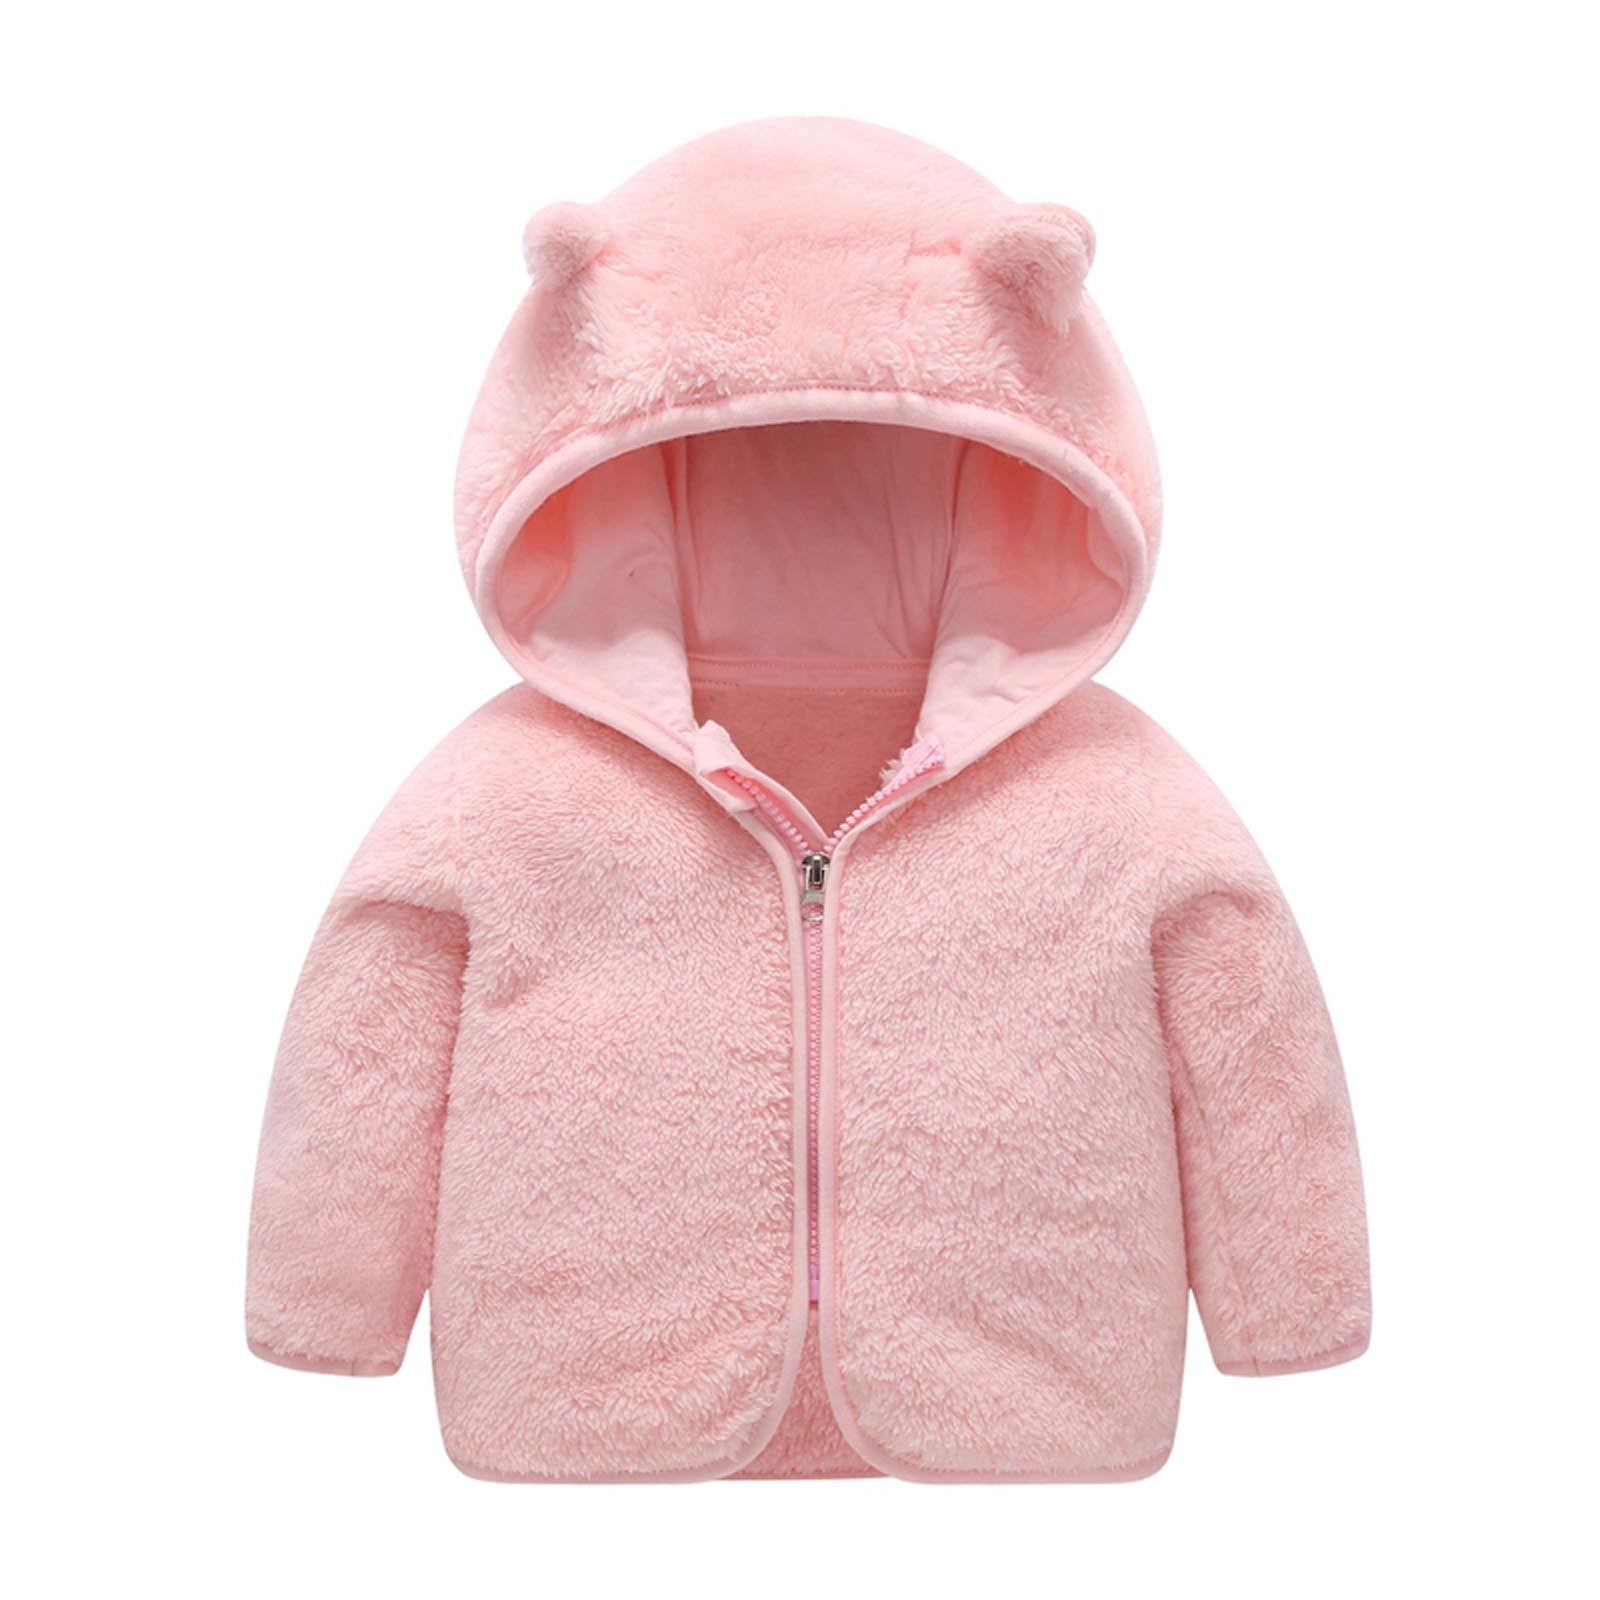 Boys Girls Hoodies Hooded Sweatshirts Classic Solid Sport Pullover Top Lightweight Series Plush Cotton for 5-12 Years